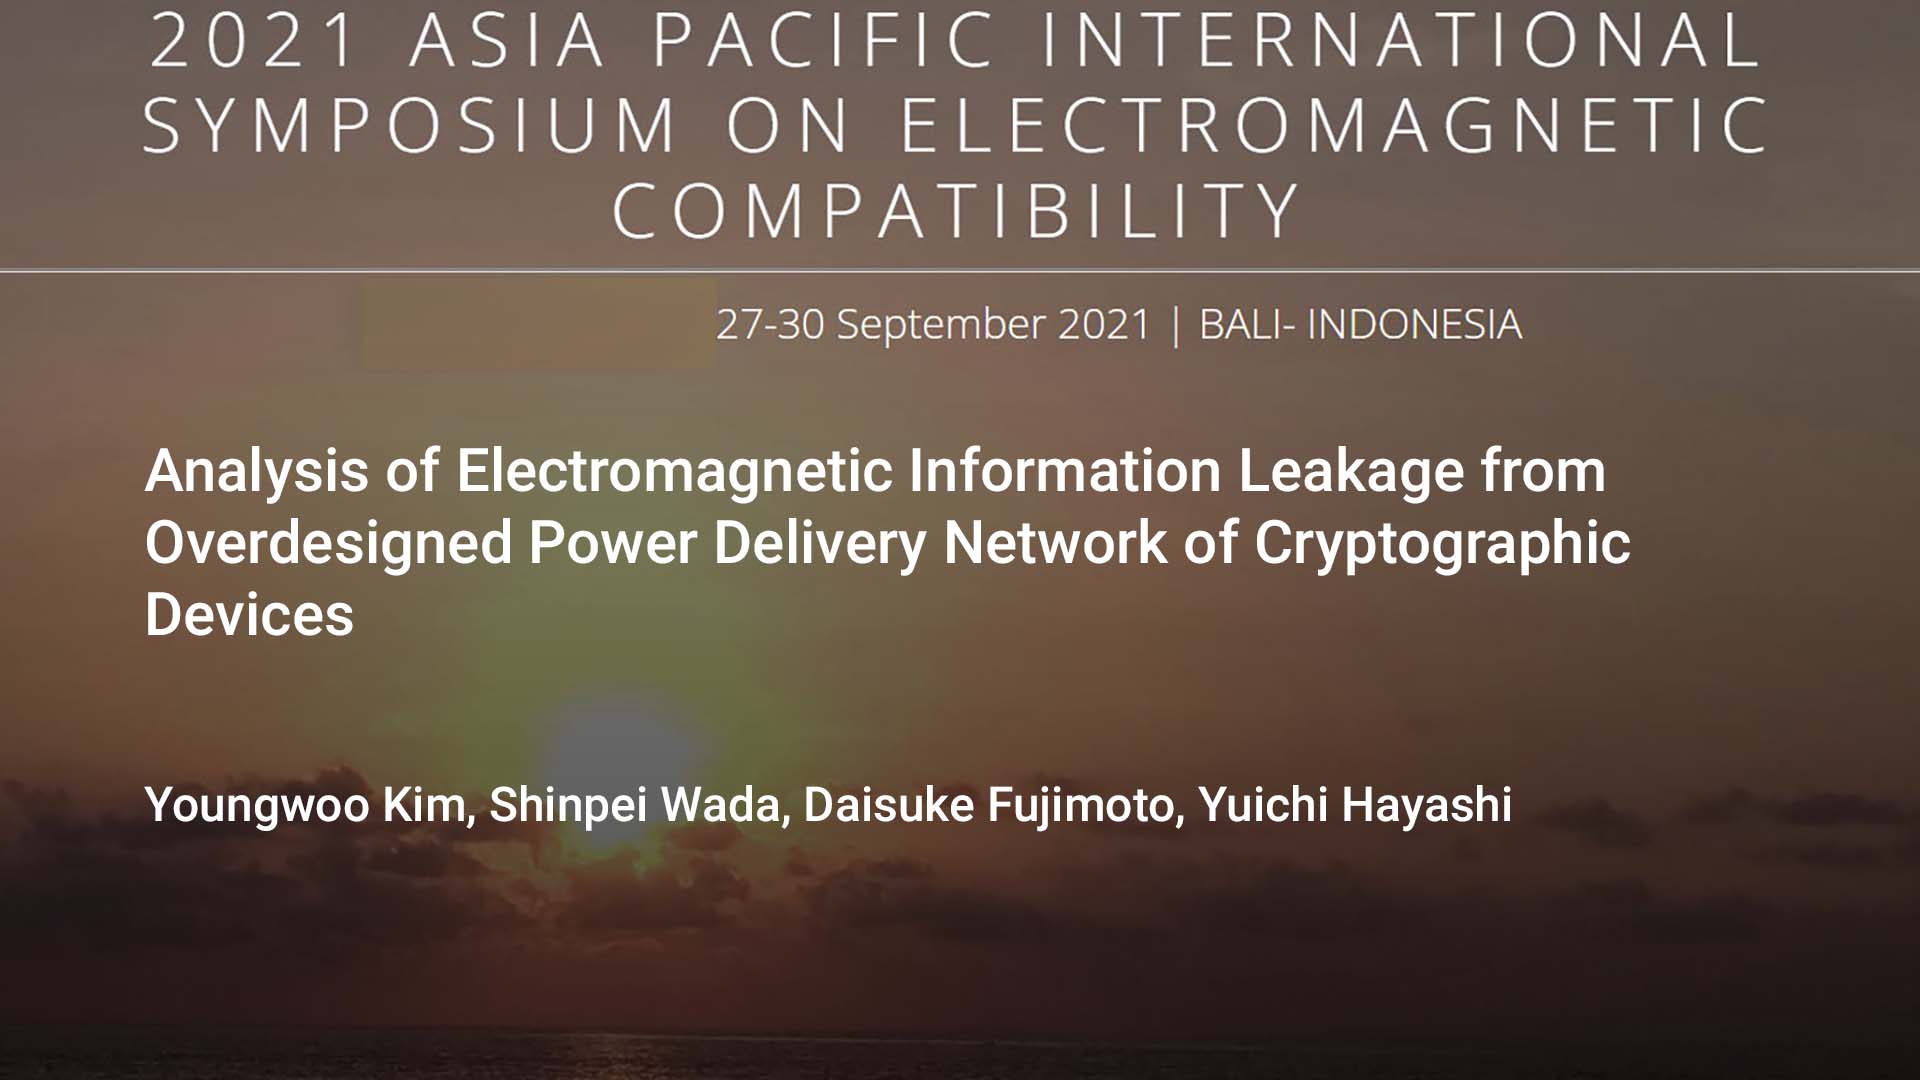 Analysis of Electromagnetic Information Leakage from Overdesigned Power Delivery Network of Cryptographic Devices